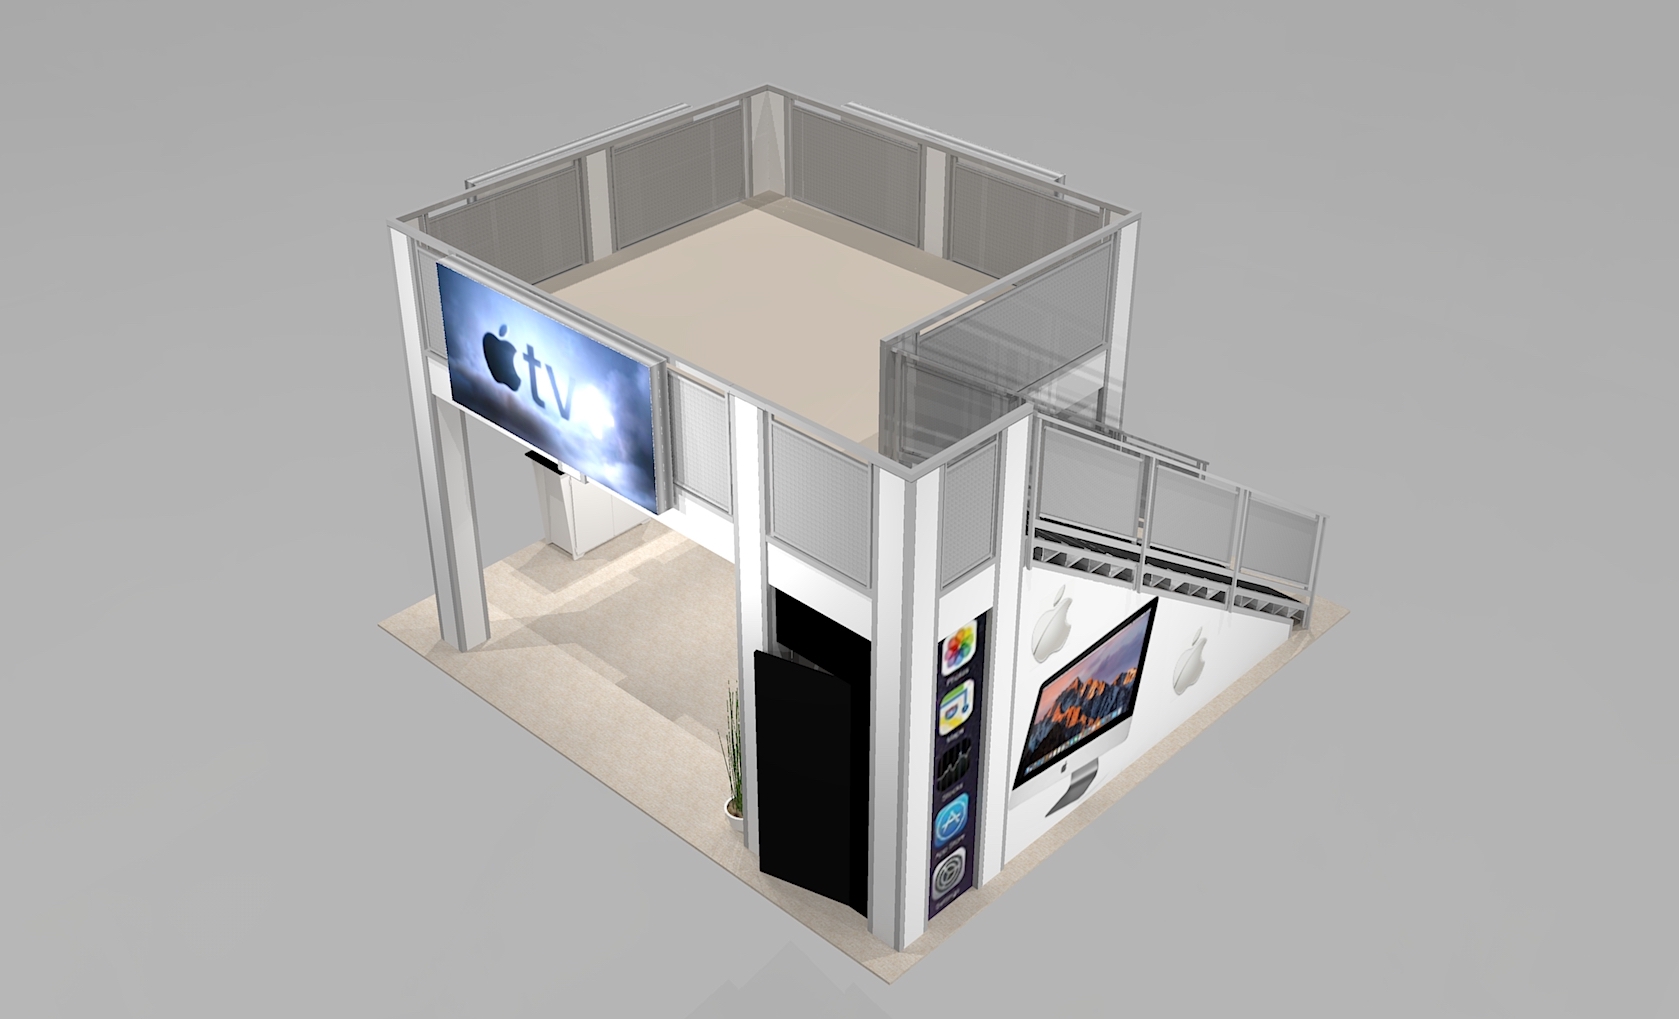 Trade Show Double Deck for 20x20 Space with Open Floor Plan and Backlit Logo Signs